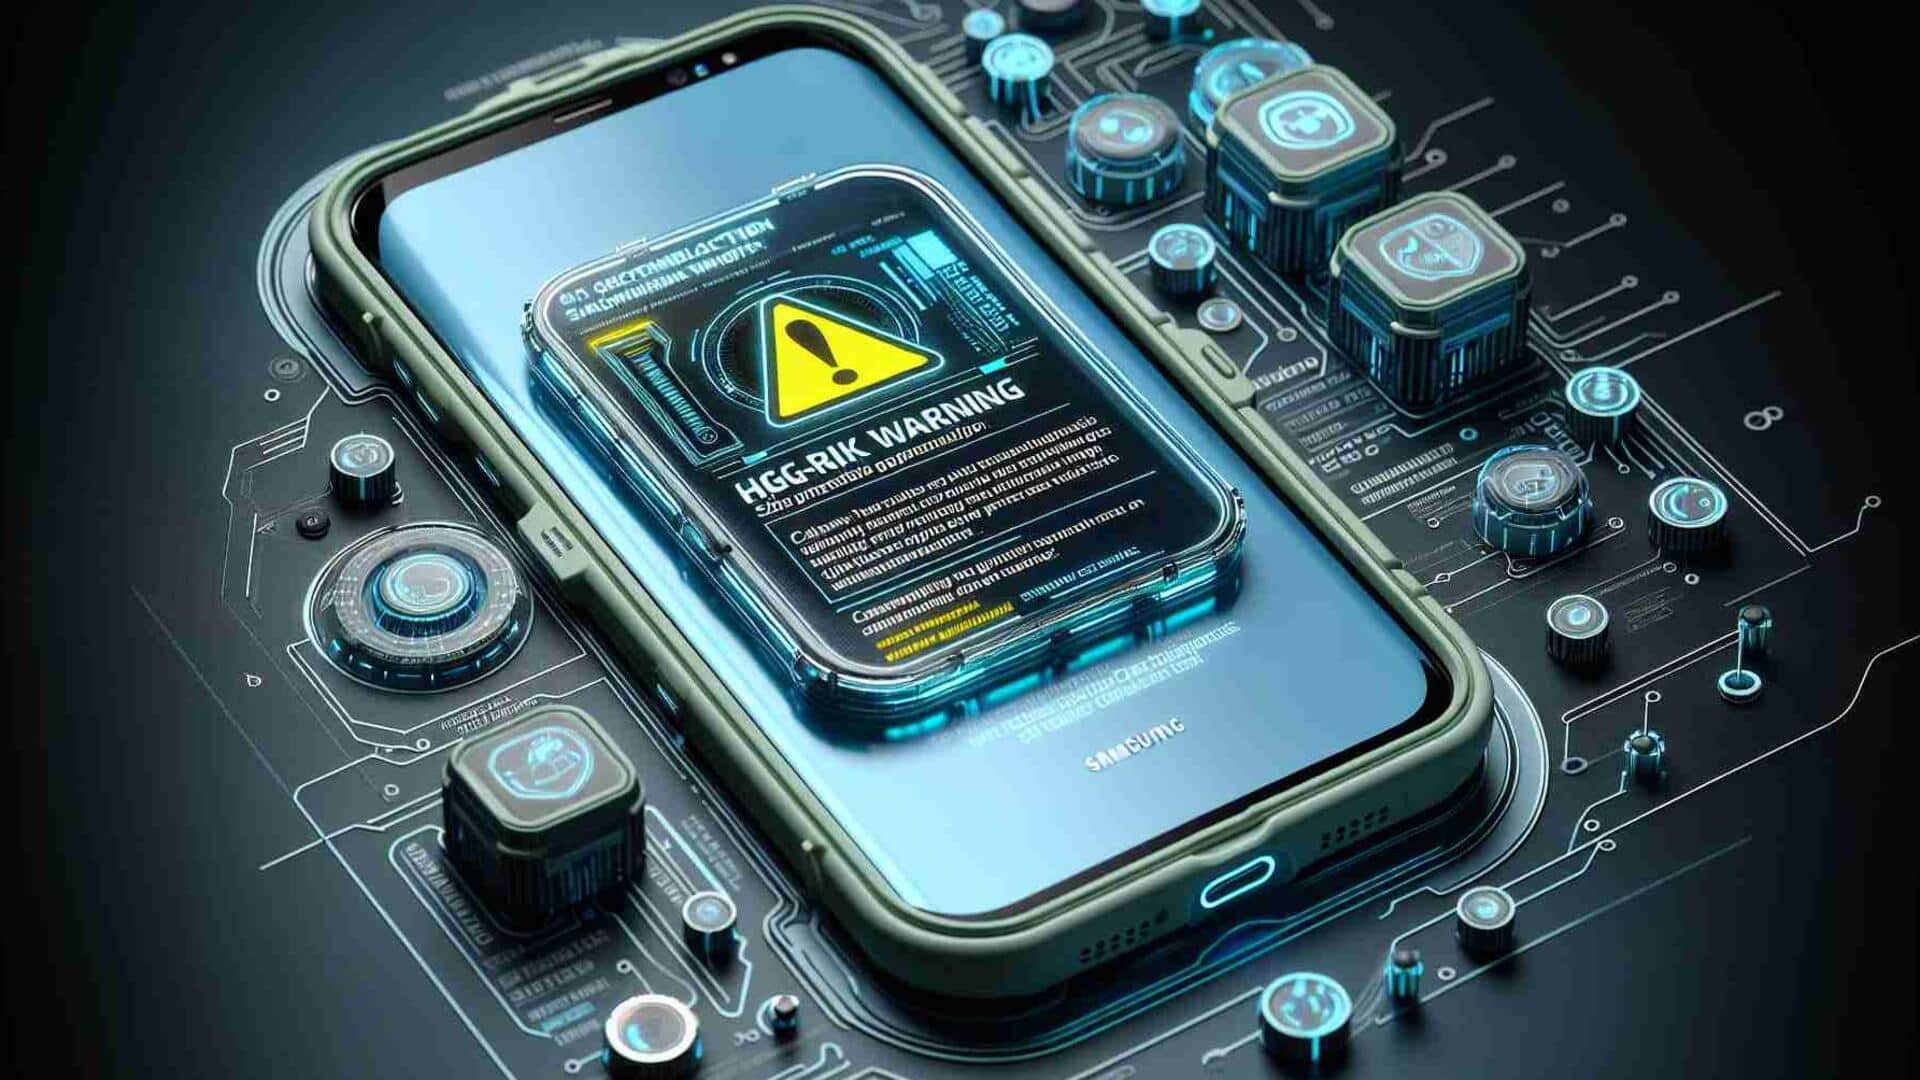 Government issues security advisory for Samsung phones: What it means